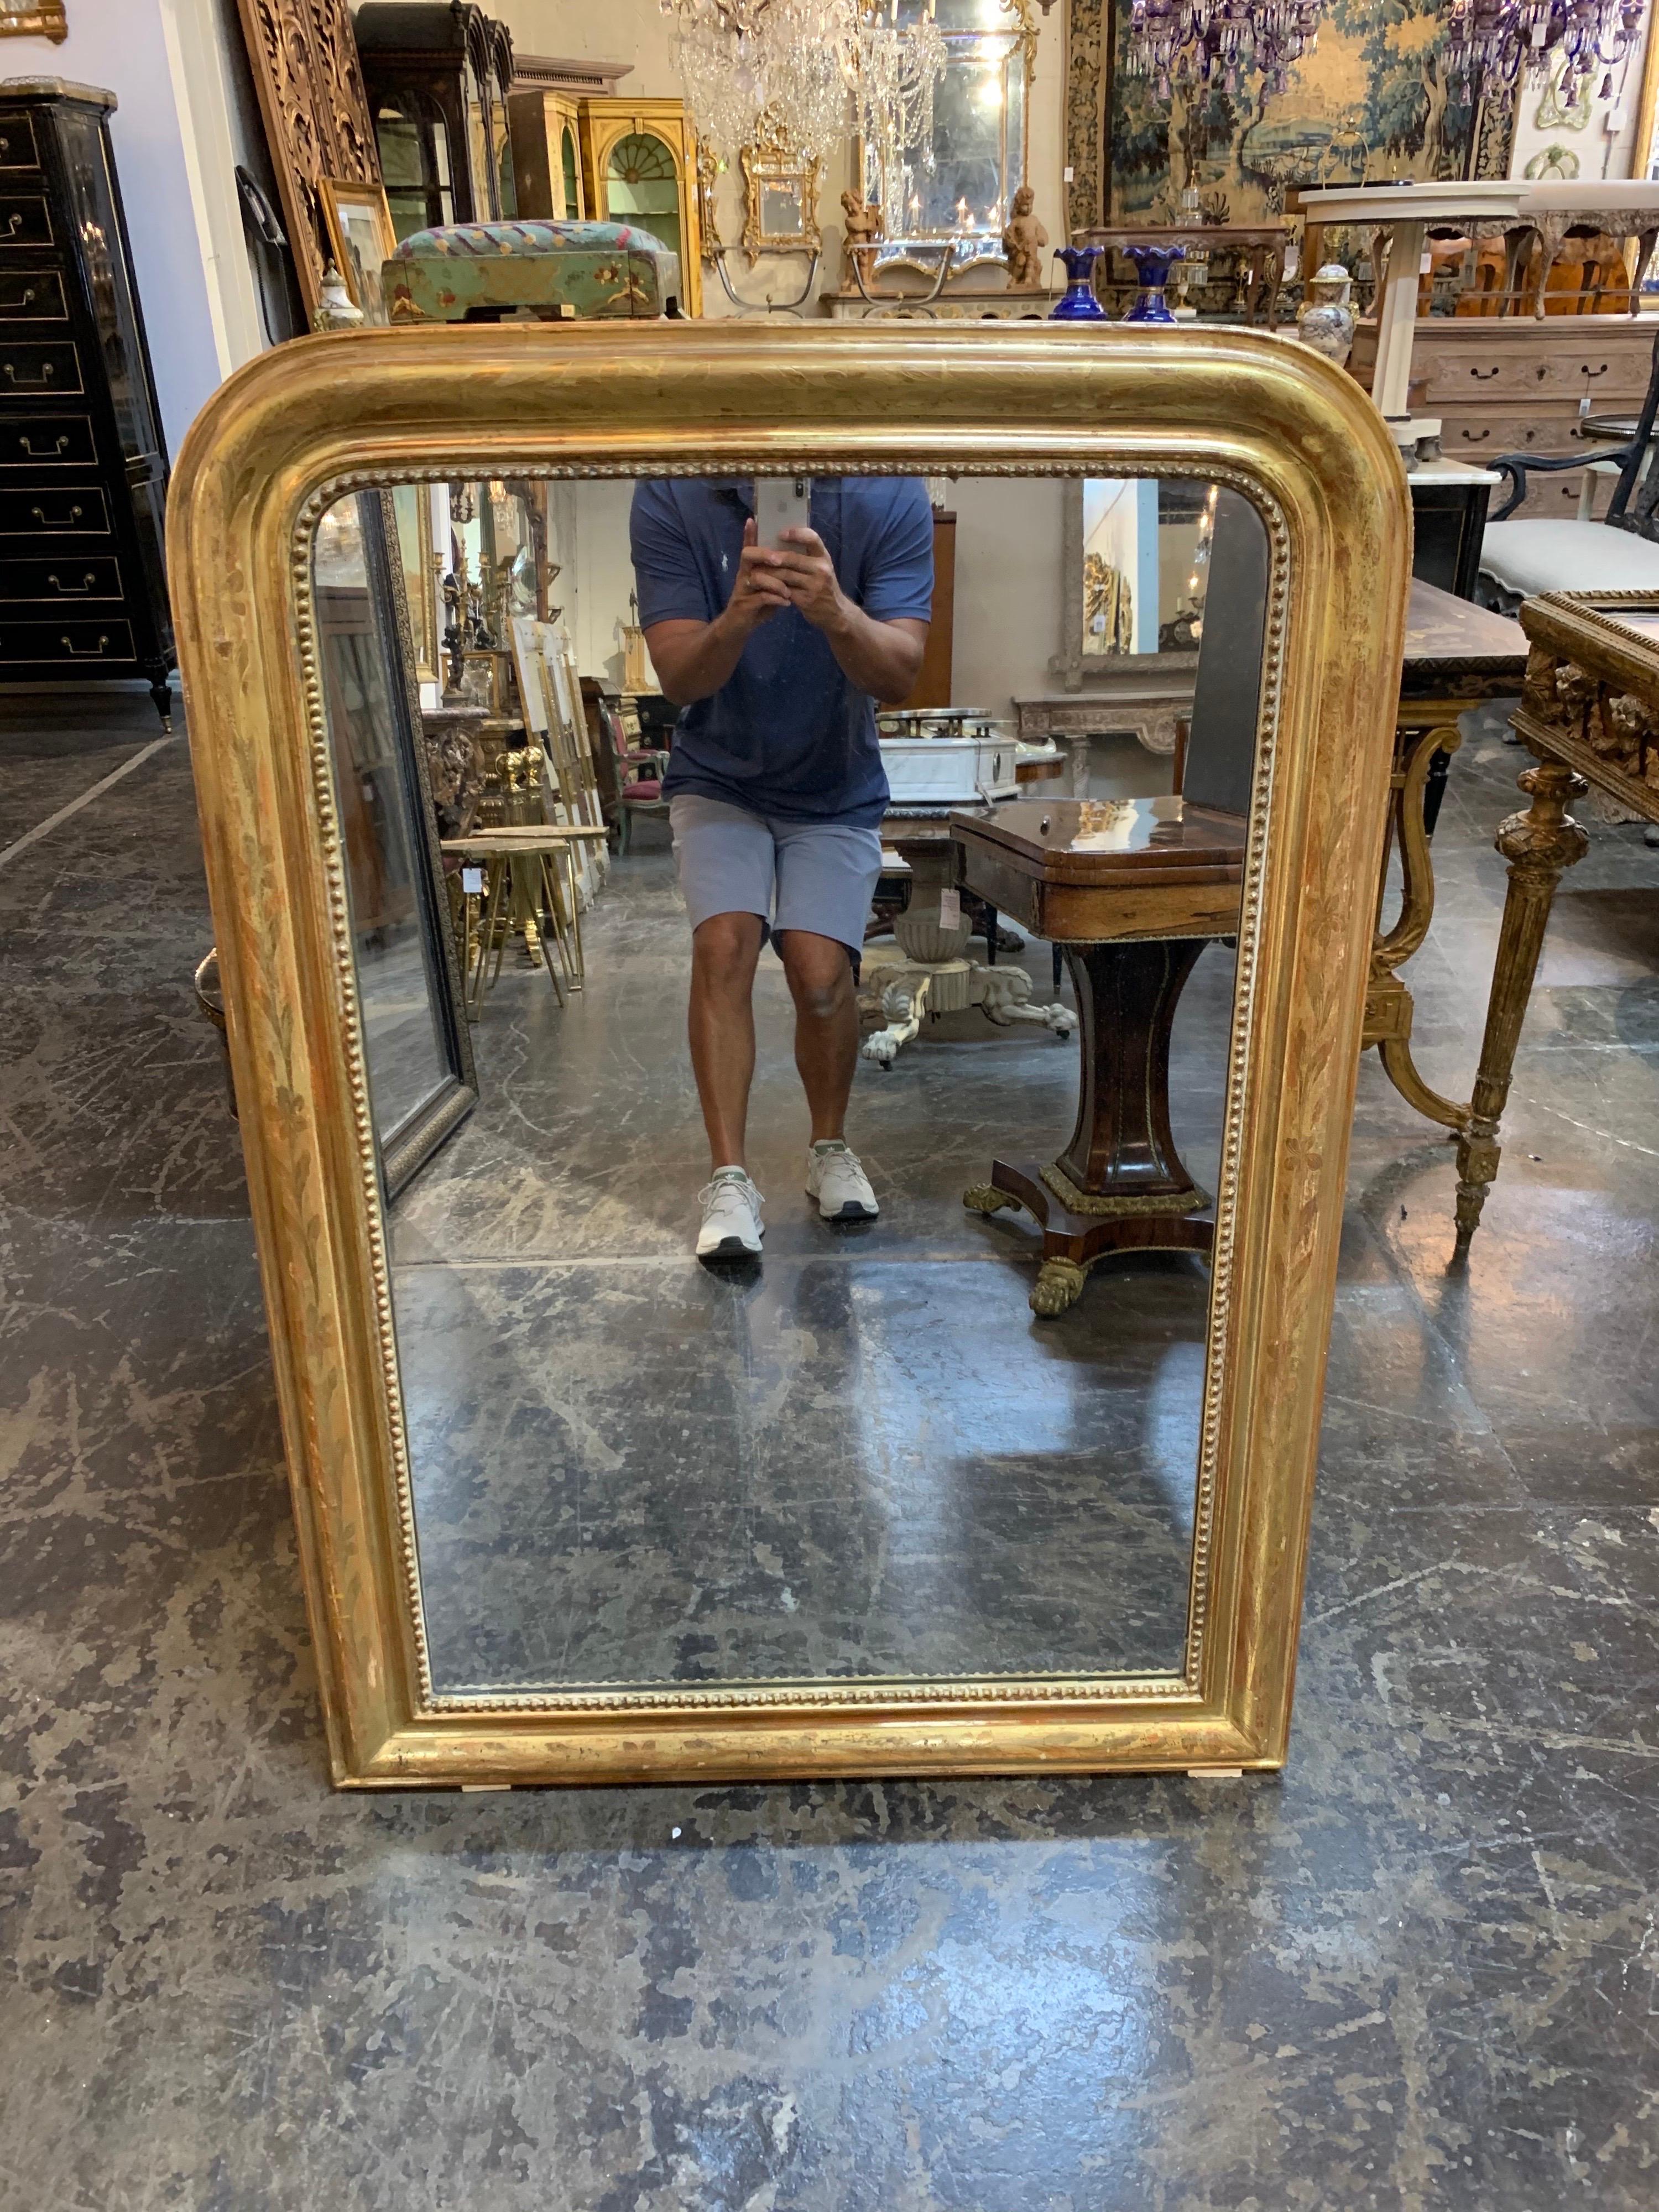 Lovely Louis Philippe mirror with beautiful gold gilt. The mirror has beaded detail on the inner border and a floral pattern. So pretty!